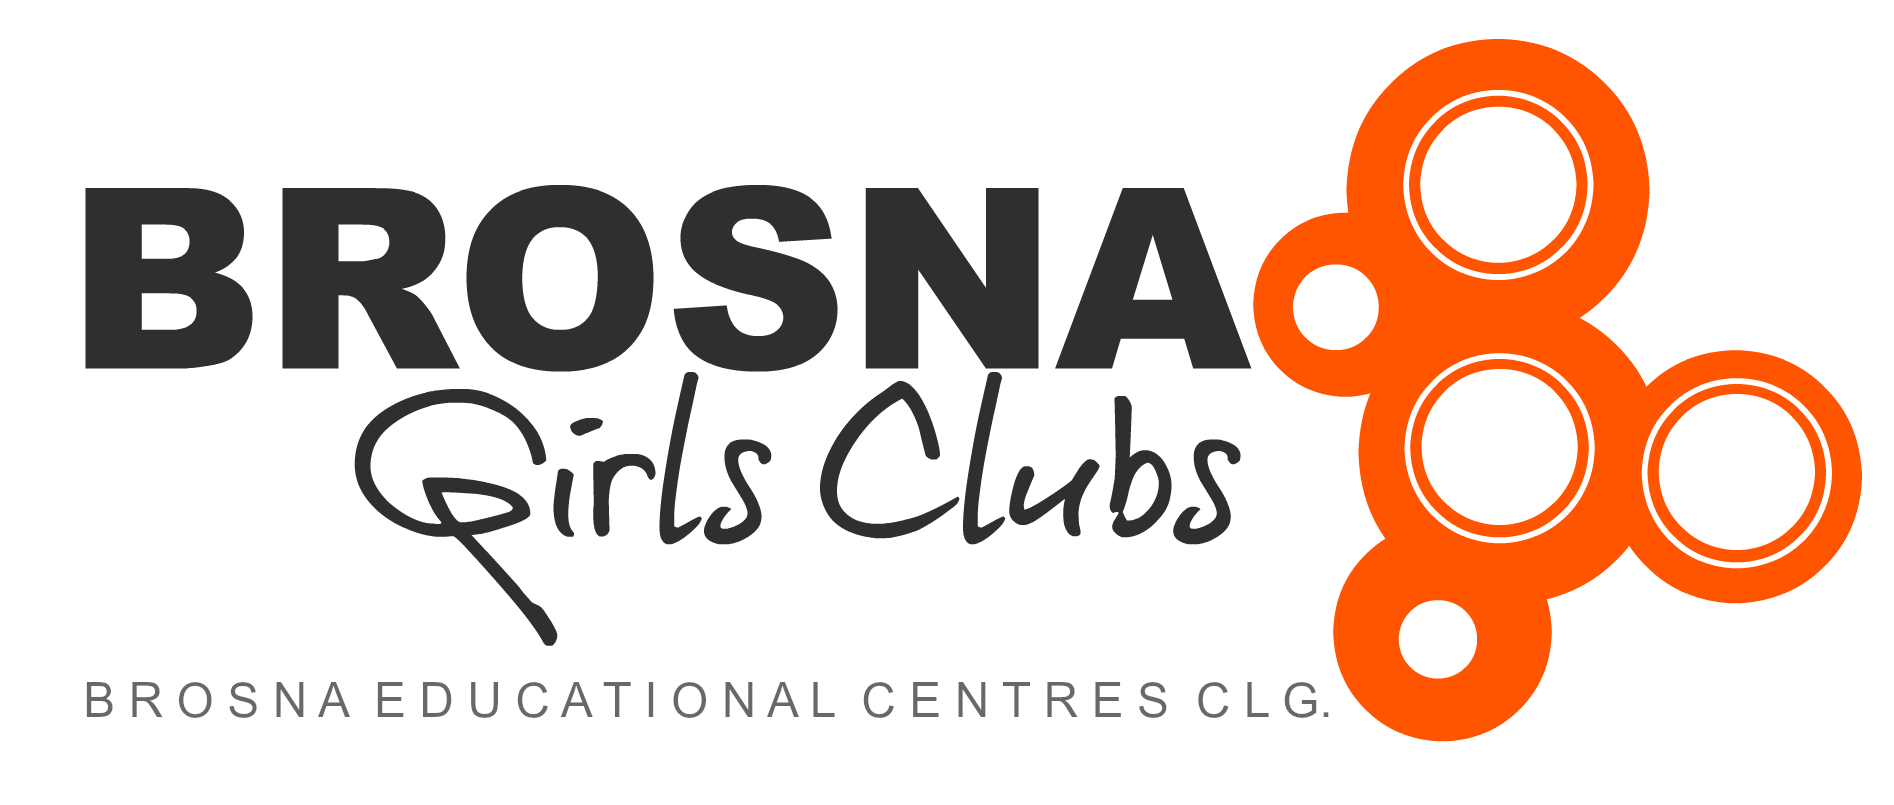 Dead clipart guidebook. Brosna girls clubs educational